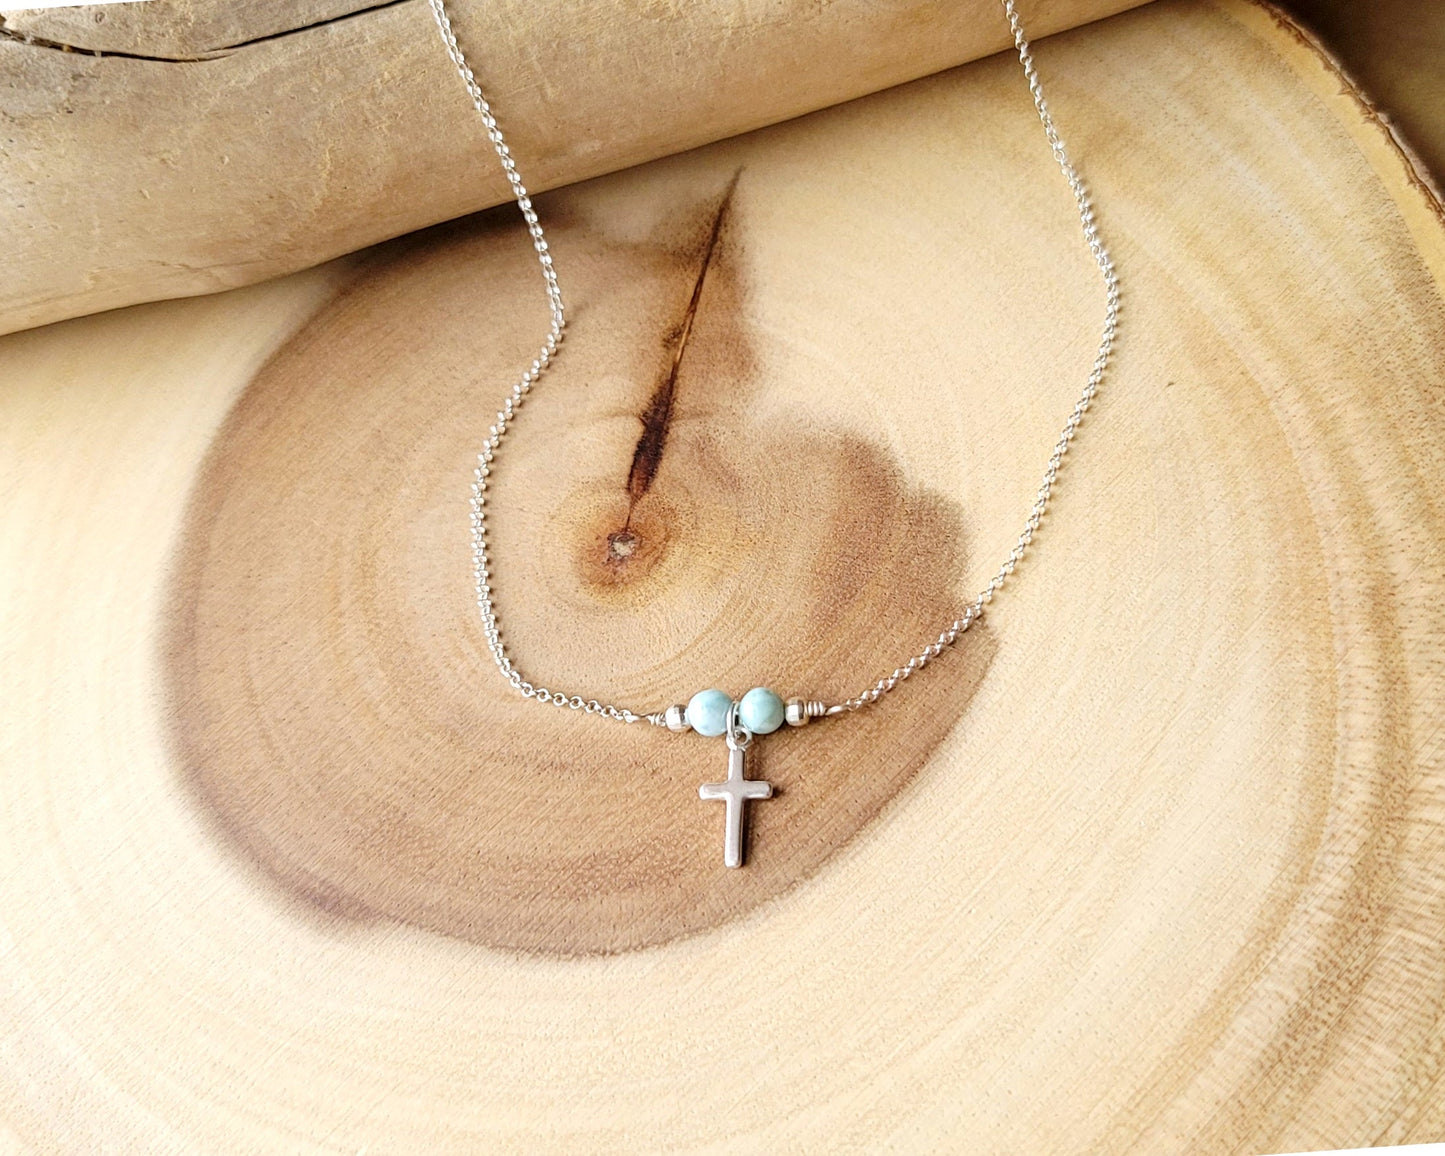 Dainty Cross and Larimar Necklace, Natural Larimar, Stefilia's Stone, Dolphin Stone, Sterling Silver